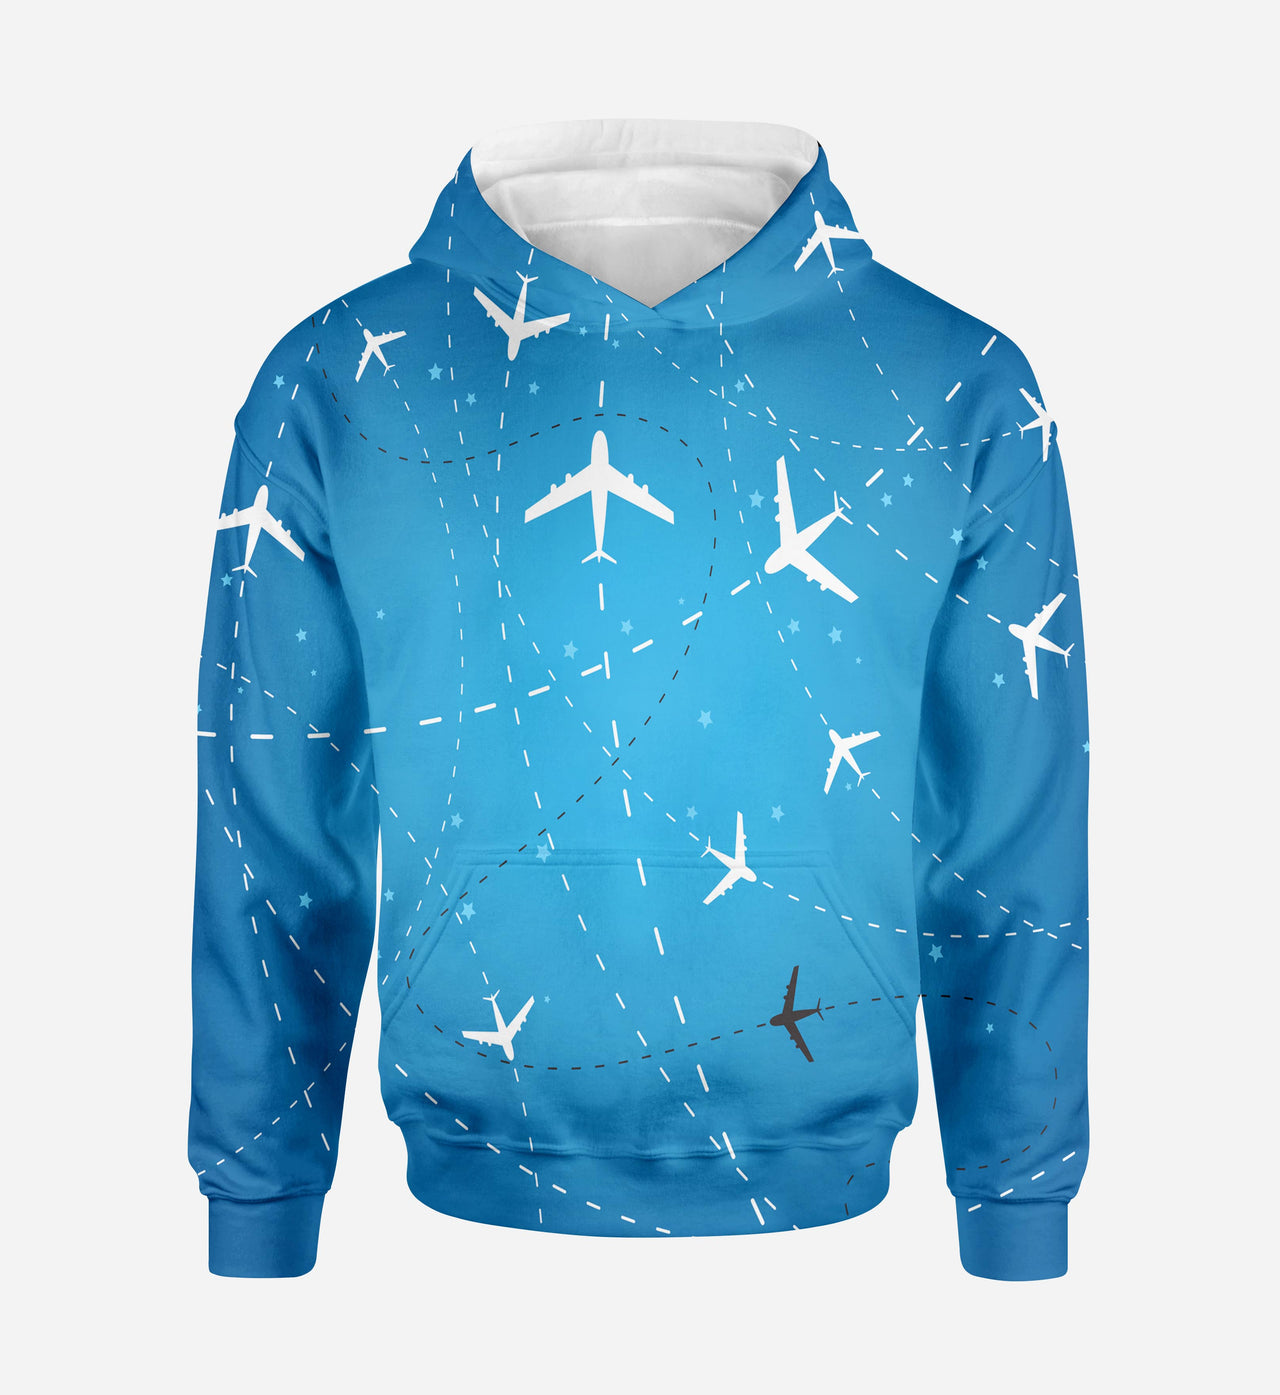 Travelling with Aircraft Printed 3D Hoodies